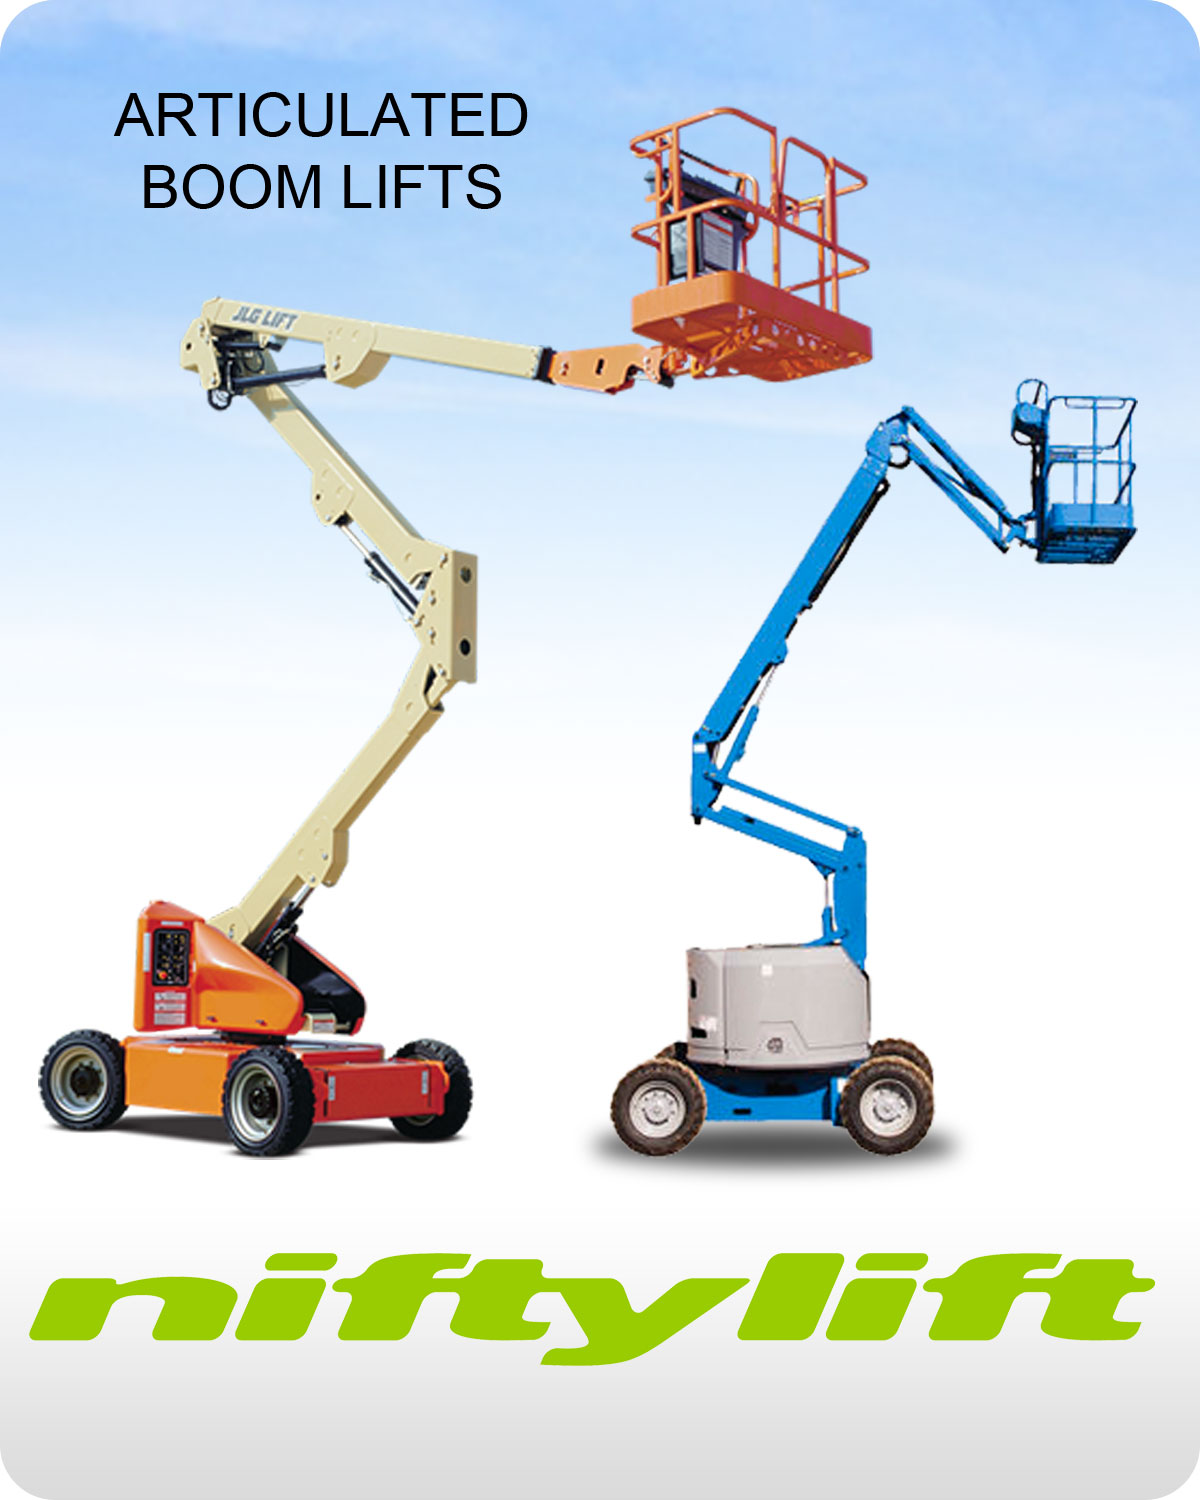 NiftyLift Articulated Boom Lift